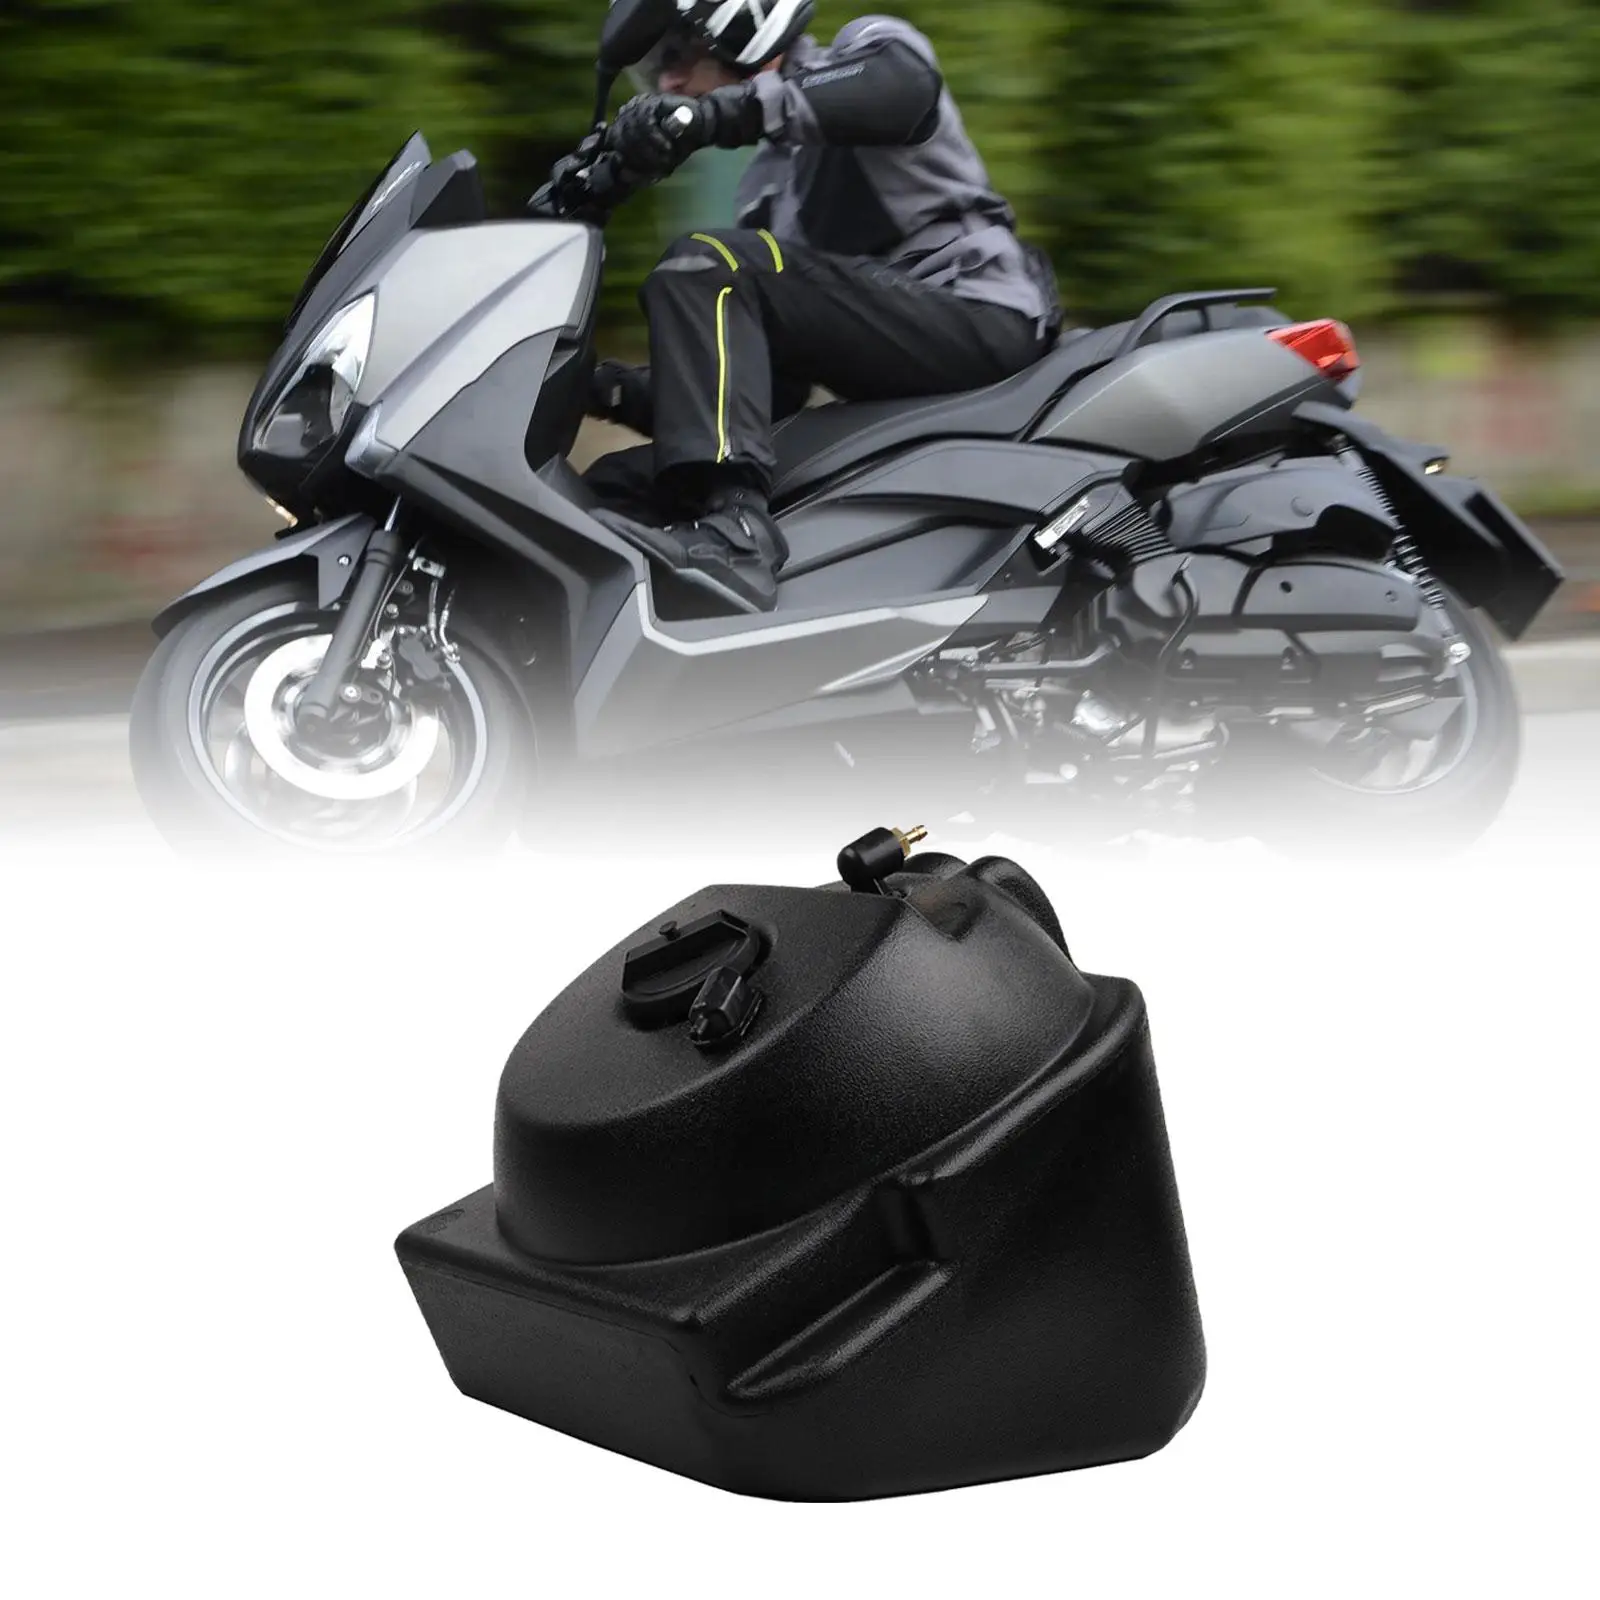 Black Auxiliary Fuel Tank Motorcycle Accessory Replaces Motorcycle Fuel Tank for